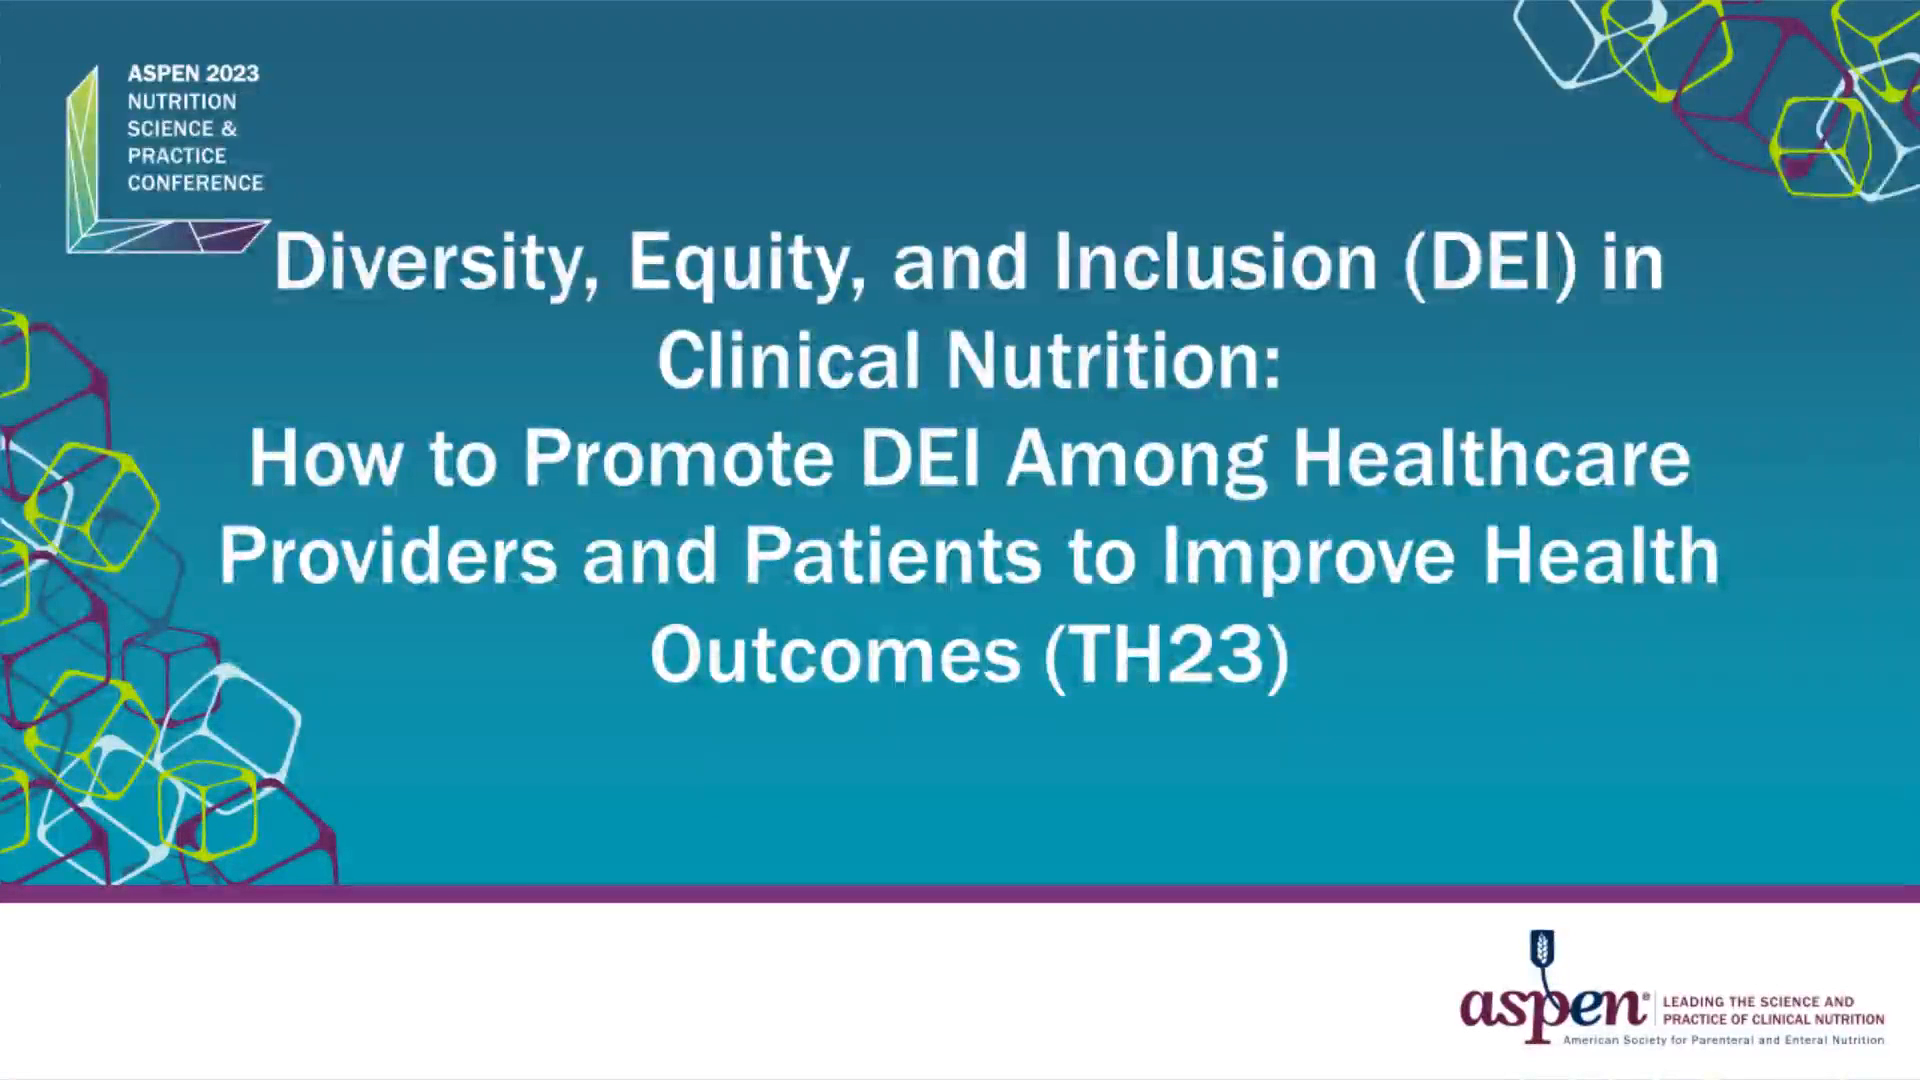 Diversity, Equity, and Inclusion (DEI) in Clinical Nutrition: How to Promote DEI Among Healthcare Providers and Patients to Improve Health Outcomes (TH23) icon